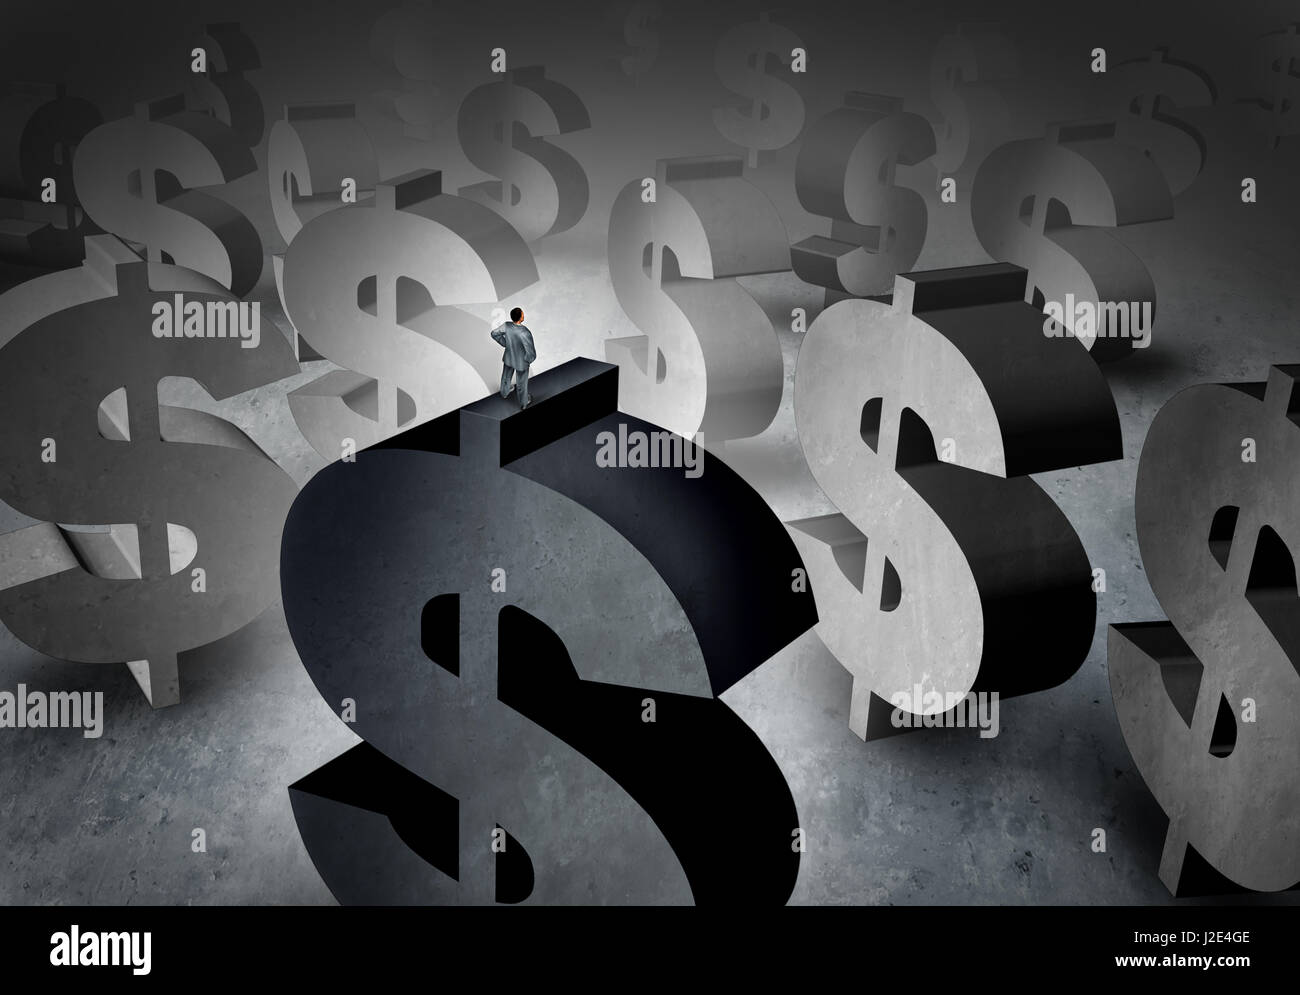 Wealth planning concept and money management symbol as a person standing on dollar signs looking at a background of future profit. Stock Photo